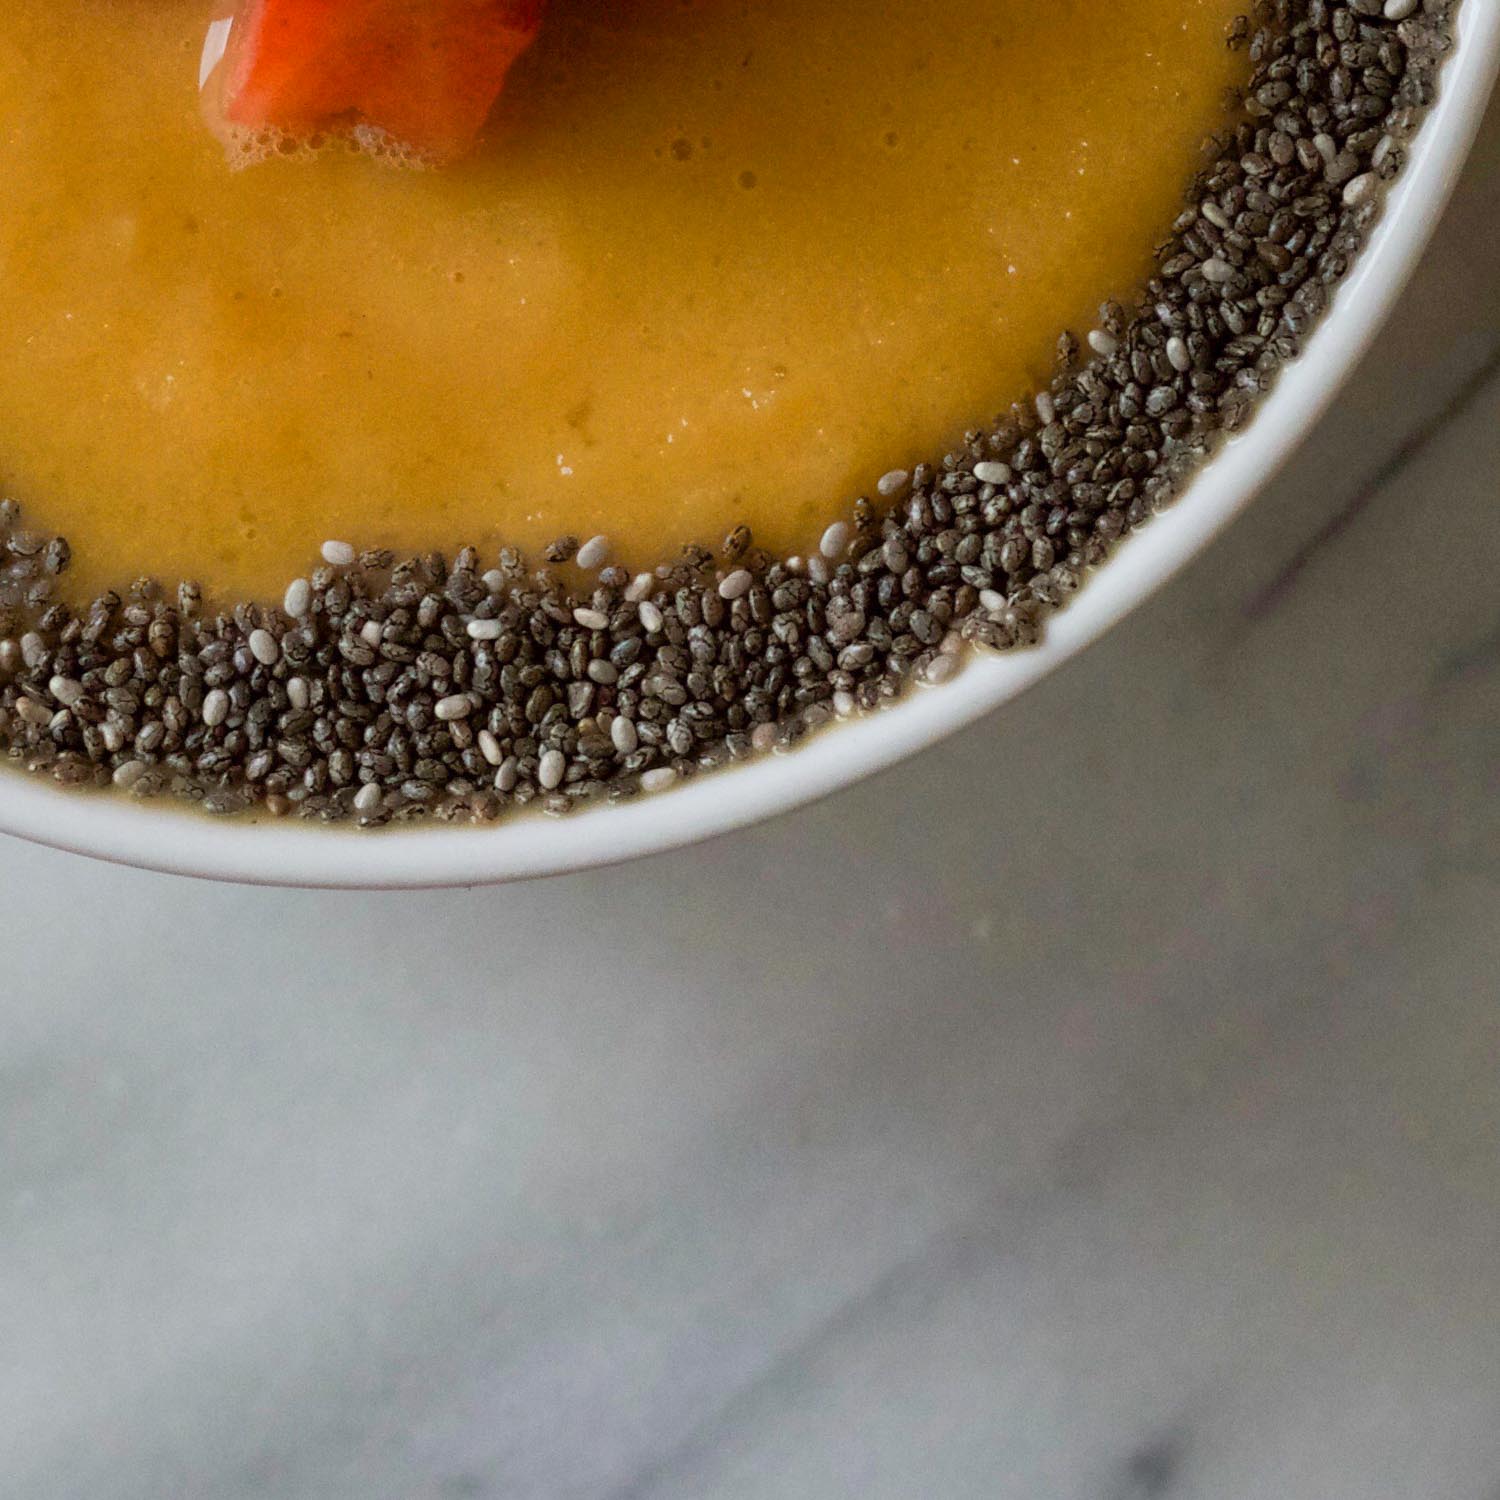 SUNNY SMOOTHIE BOWL TOPPED WITH CHIA SEEDS BY BEAUTIFUL INGREDIENT